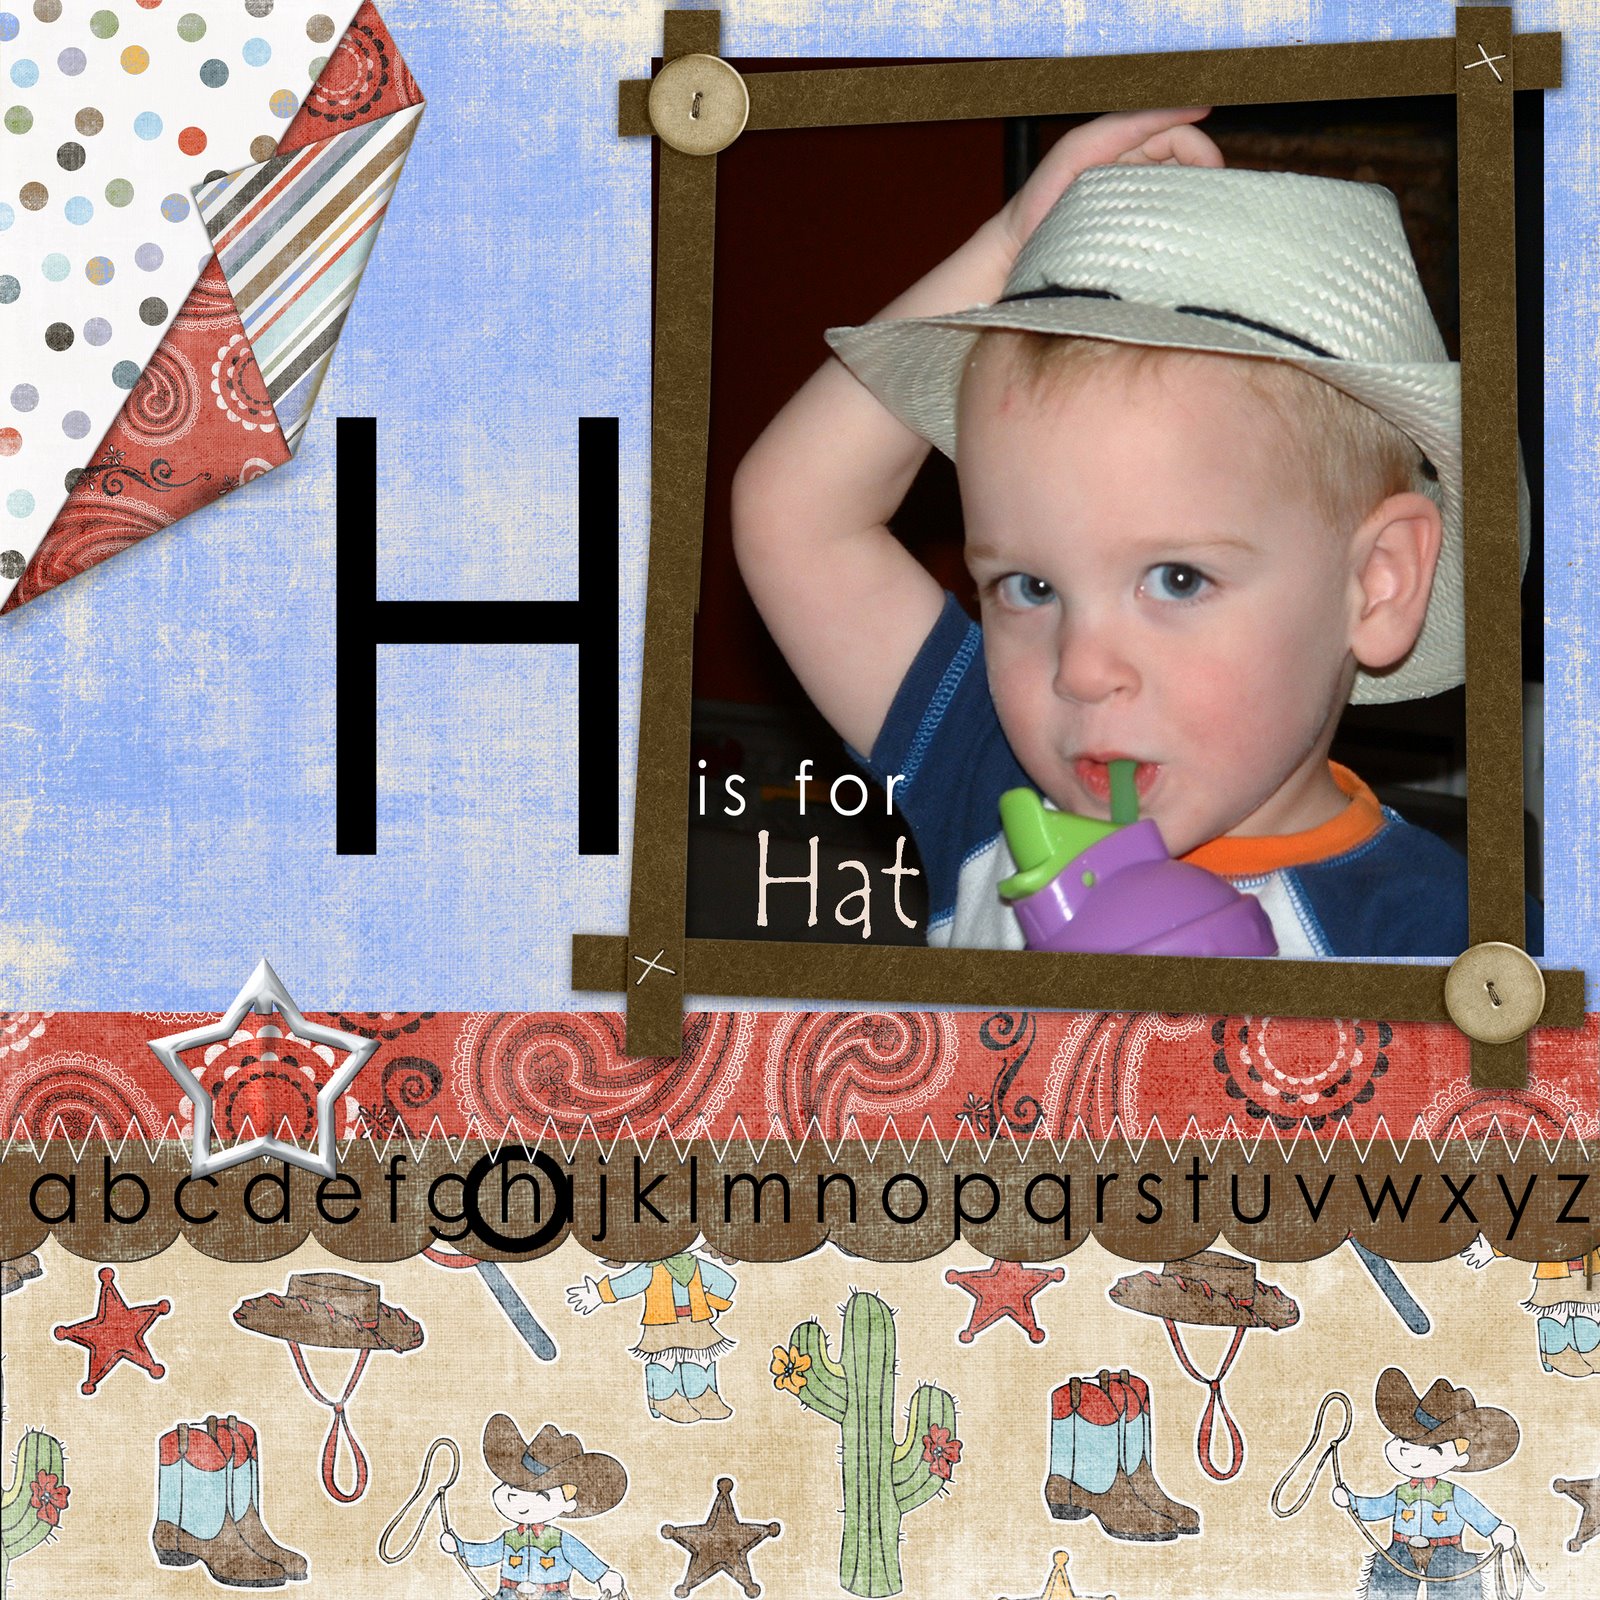 [H+is+for+Hat.jpg]